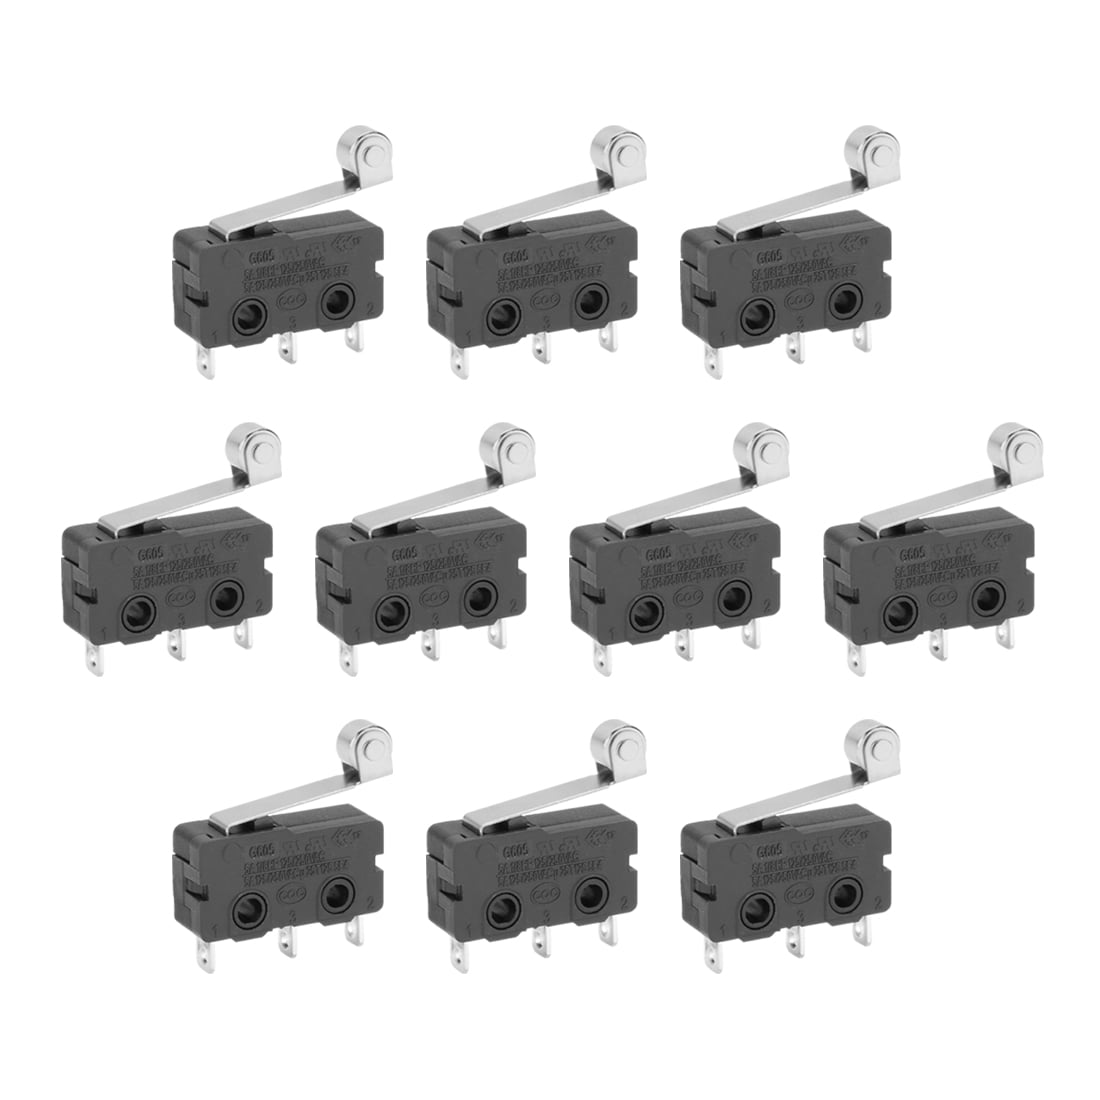 10X Lever Roller Actuator Reset Microswitch SPDT Miniature Micro Limit Switch 